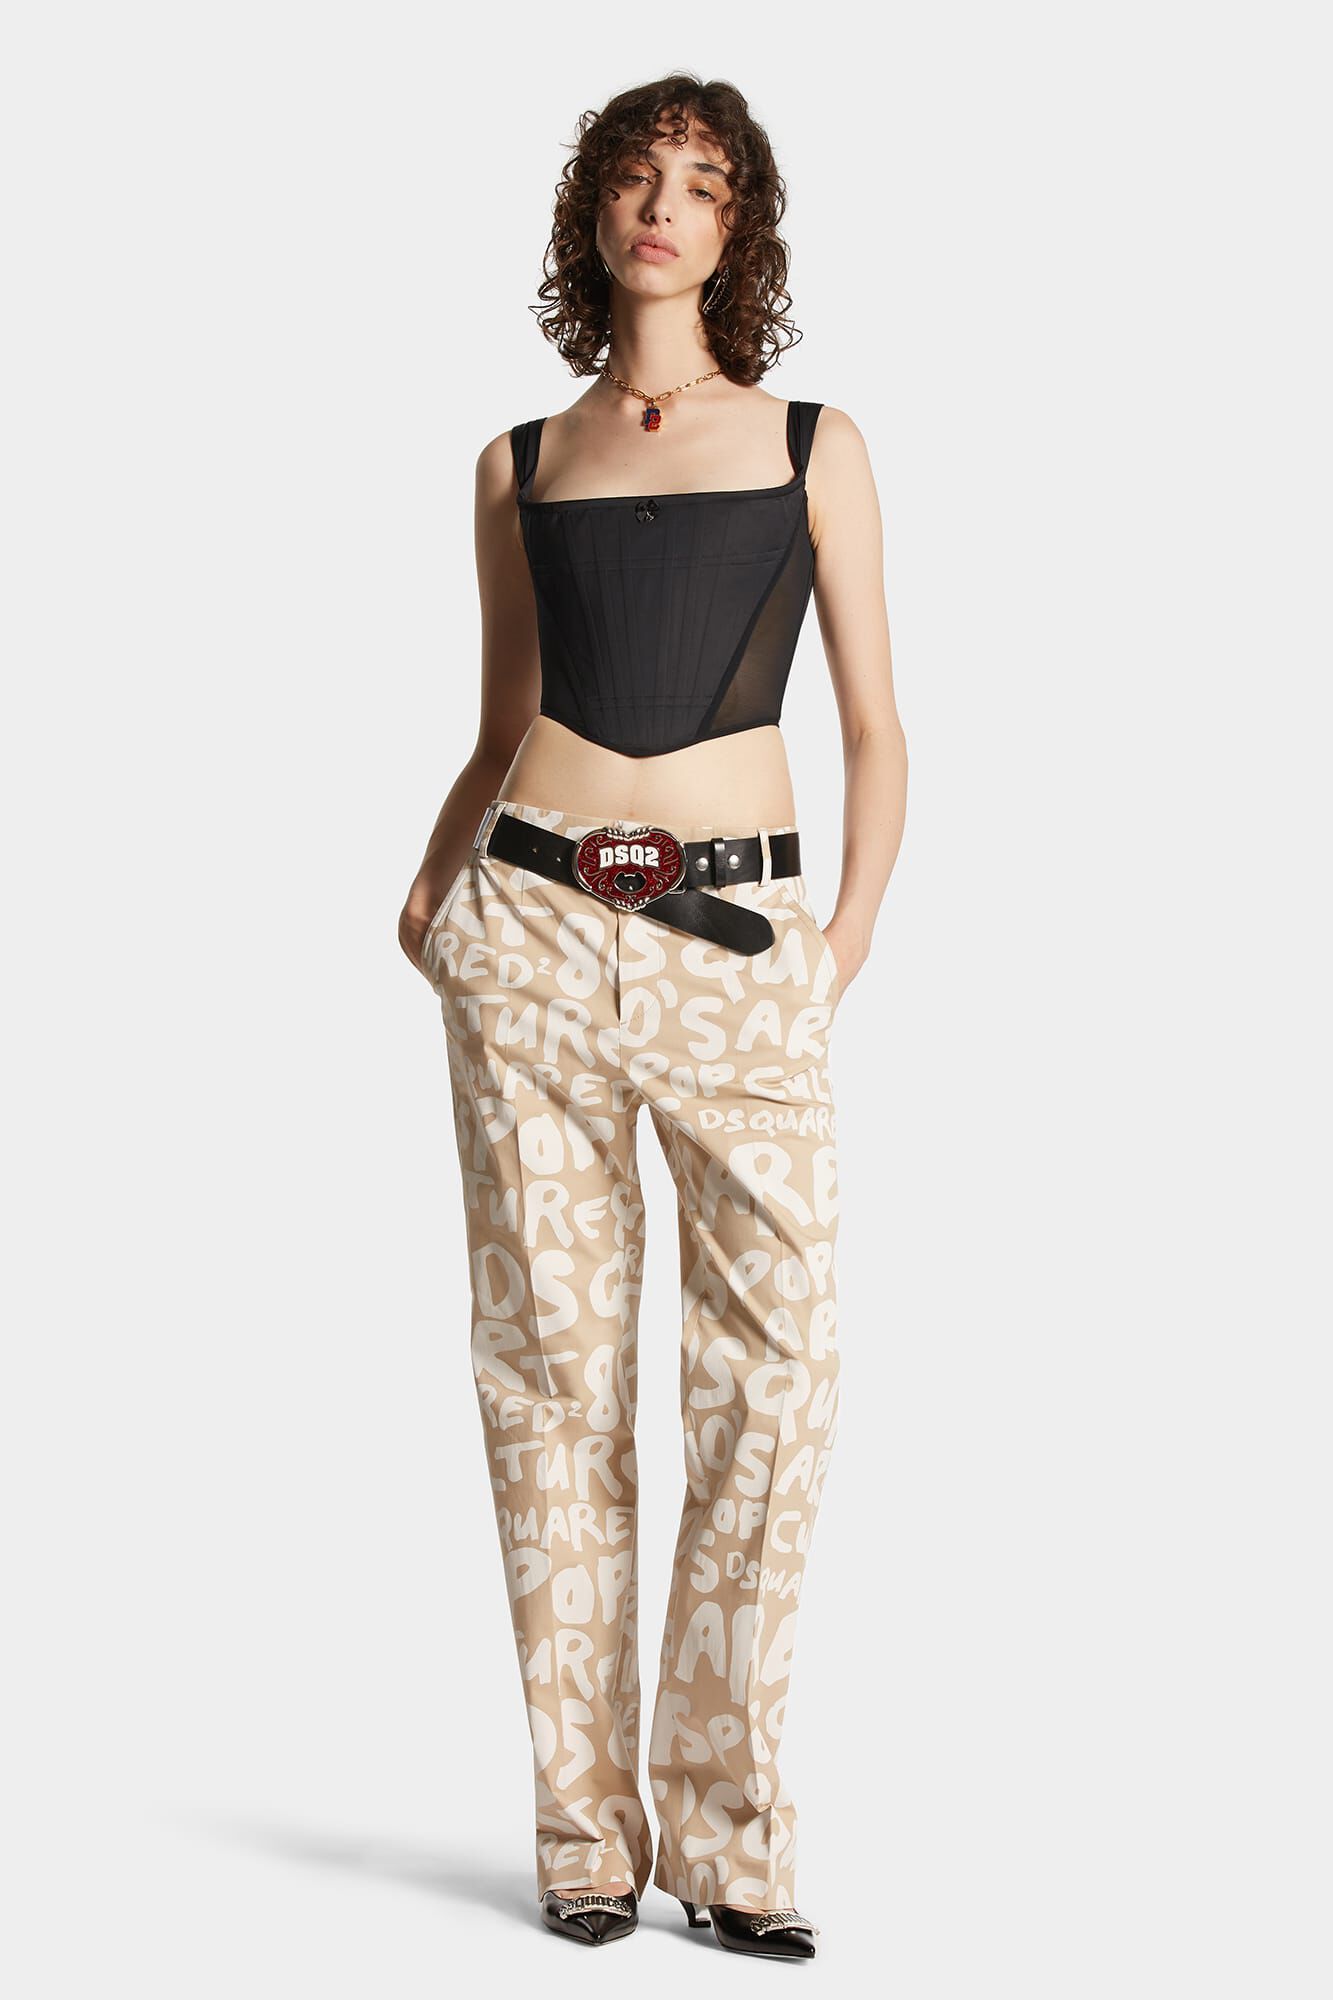 Dsquared2 kick-flare cropped trousers - Green